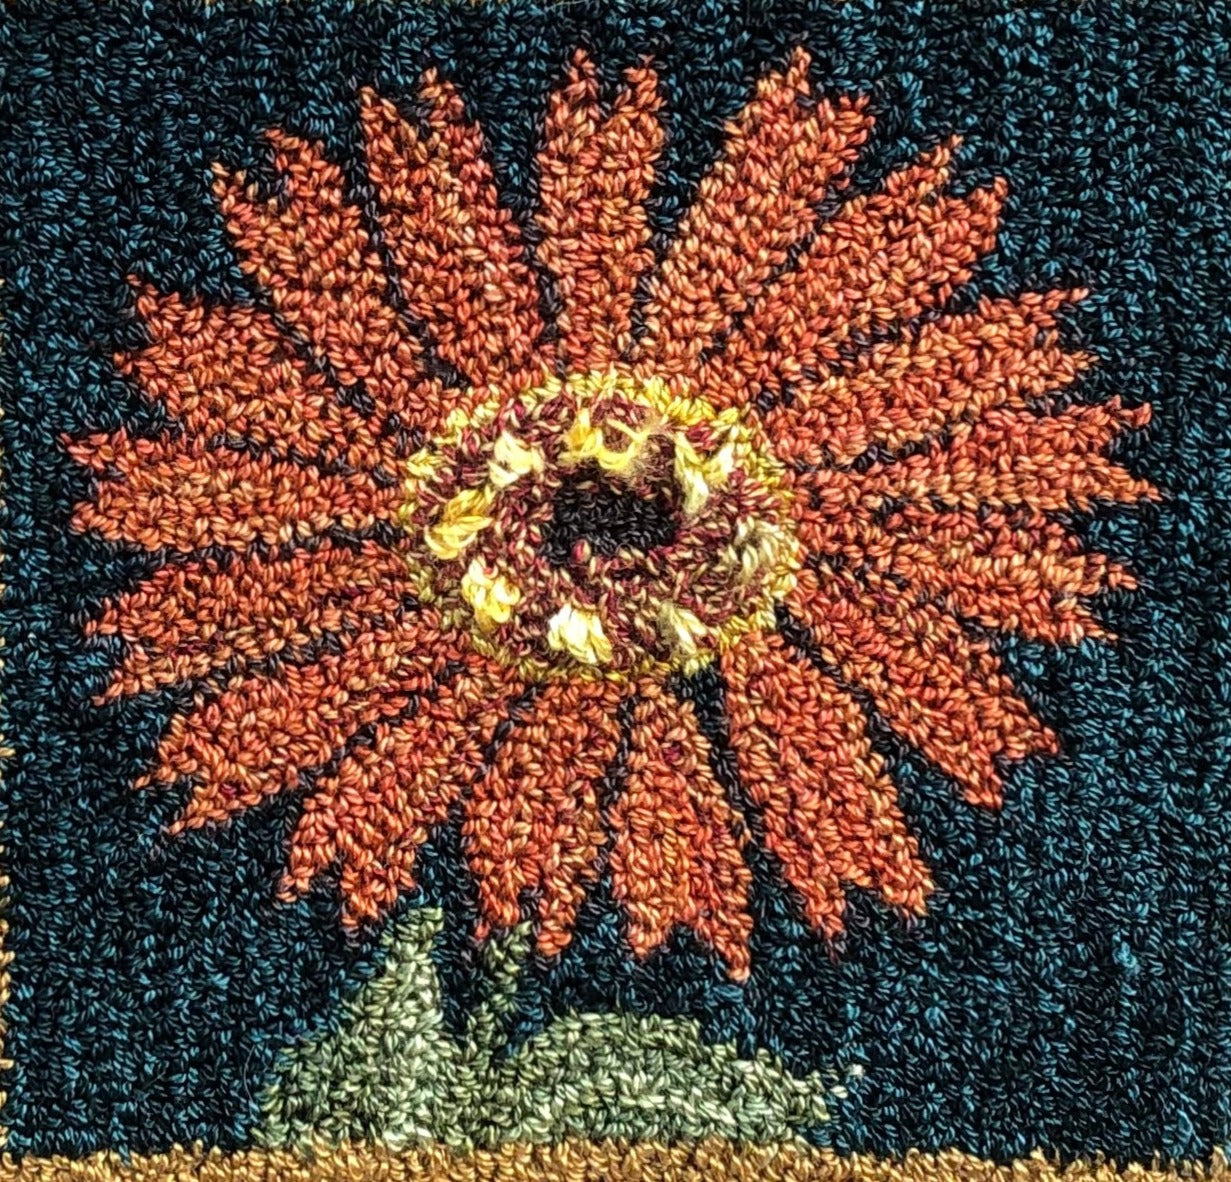 Marigold PDF Rug Hooking Pattern By Orphaned Wool. This pattern is perfect for Rug Hooking or Rug Punch Needle. This design also has a companion design Poppy-(purchased Separately). Enjoy this wonderful botanical design.